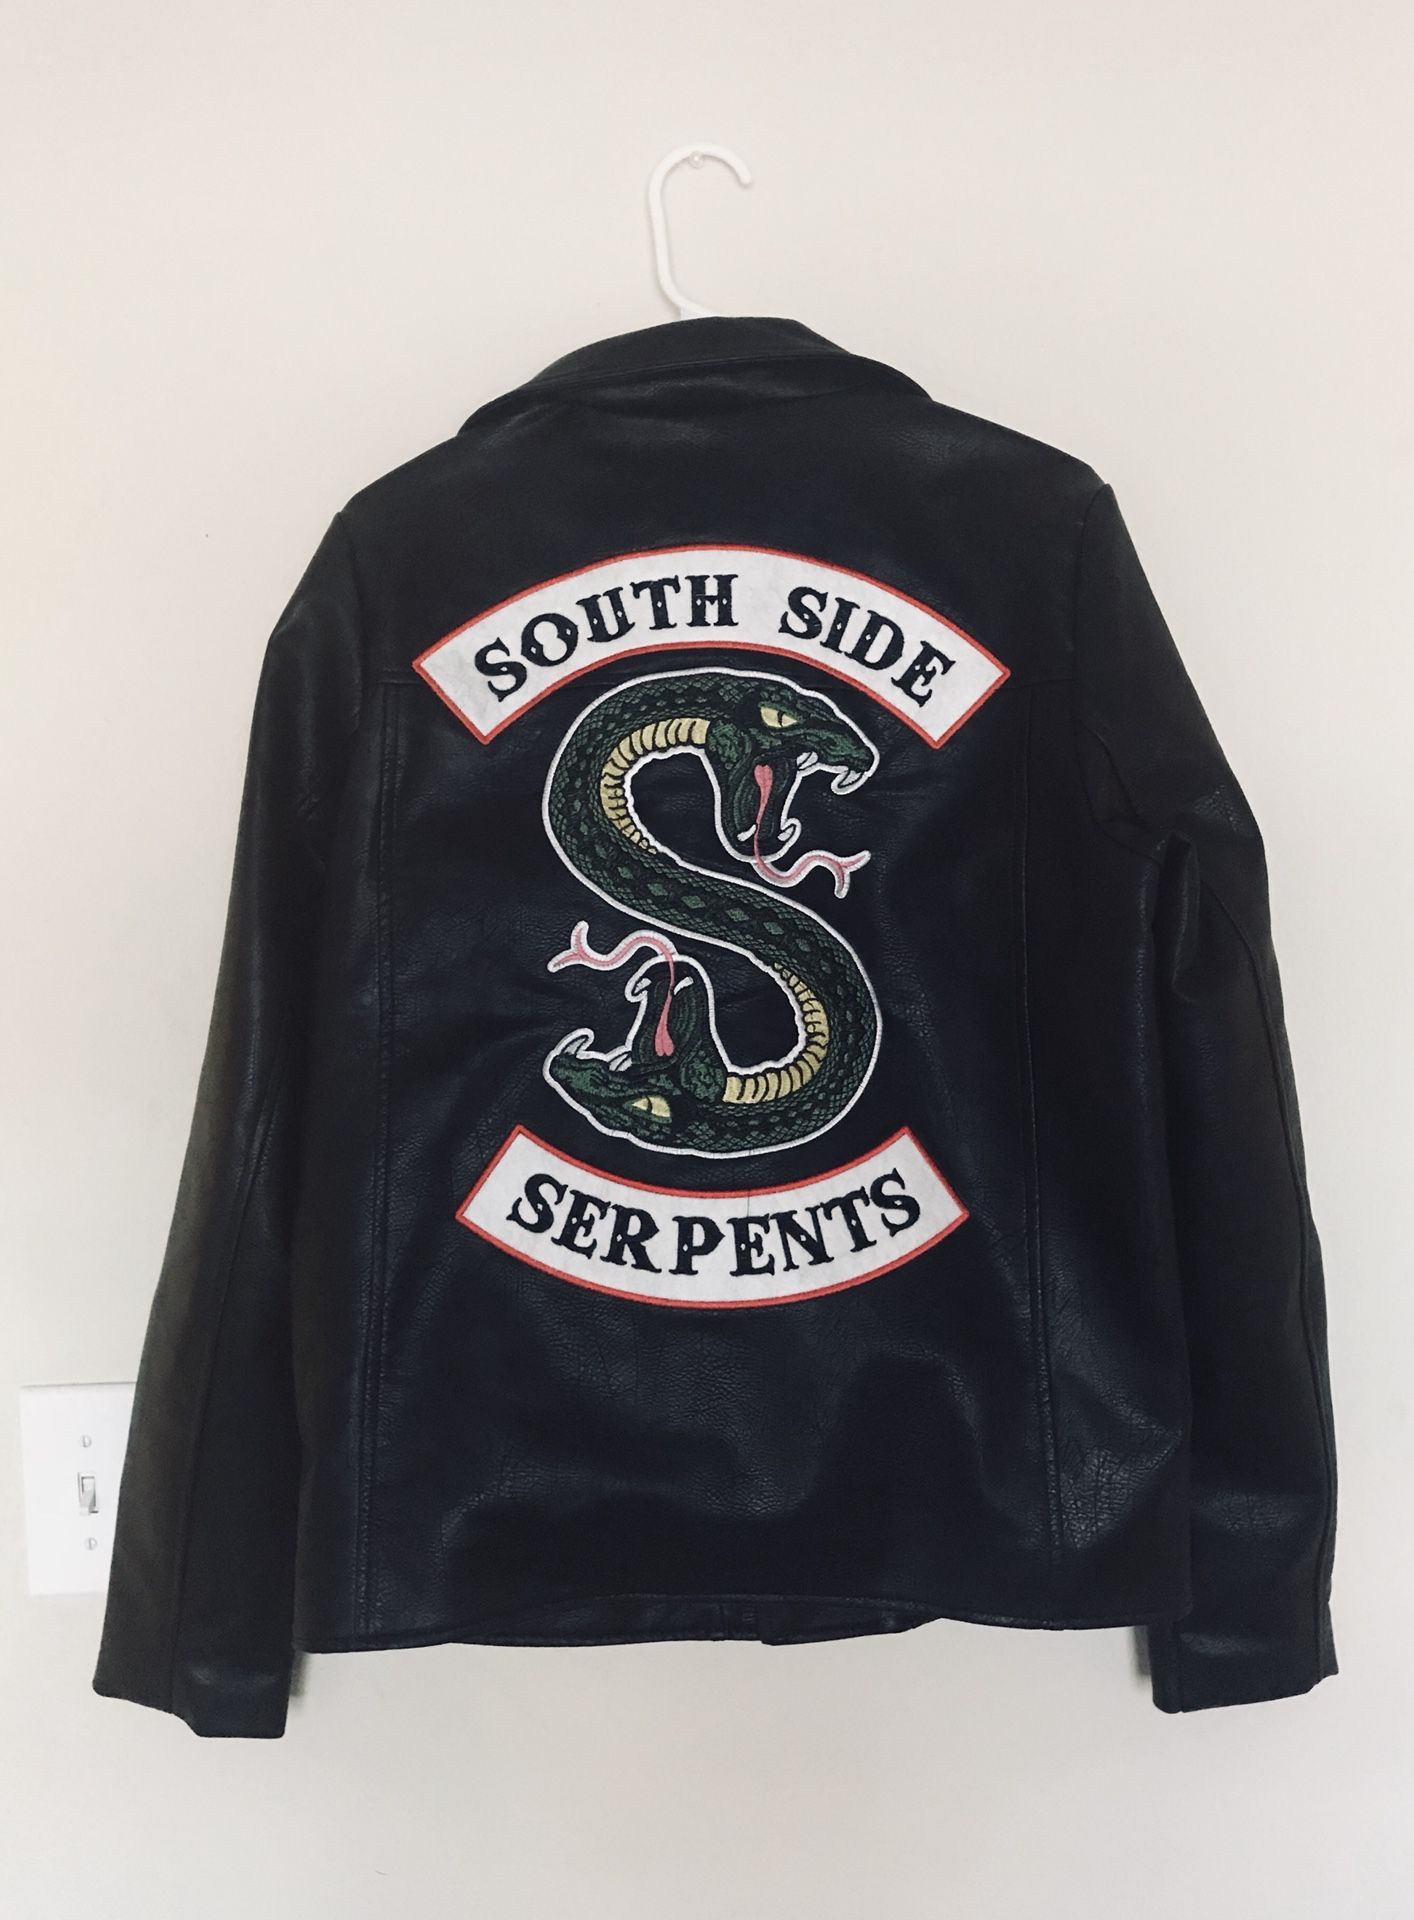 Riverdale South Side Serpents Leather Jacket